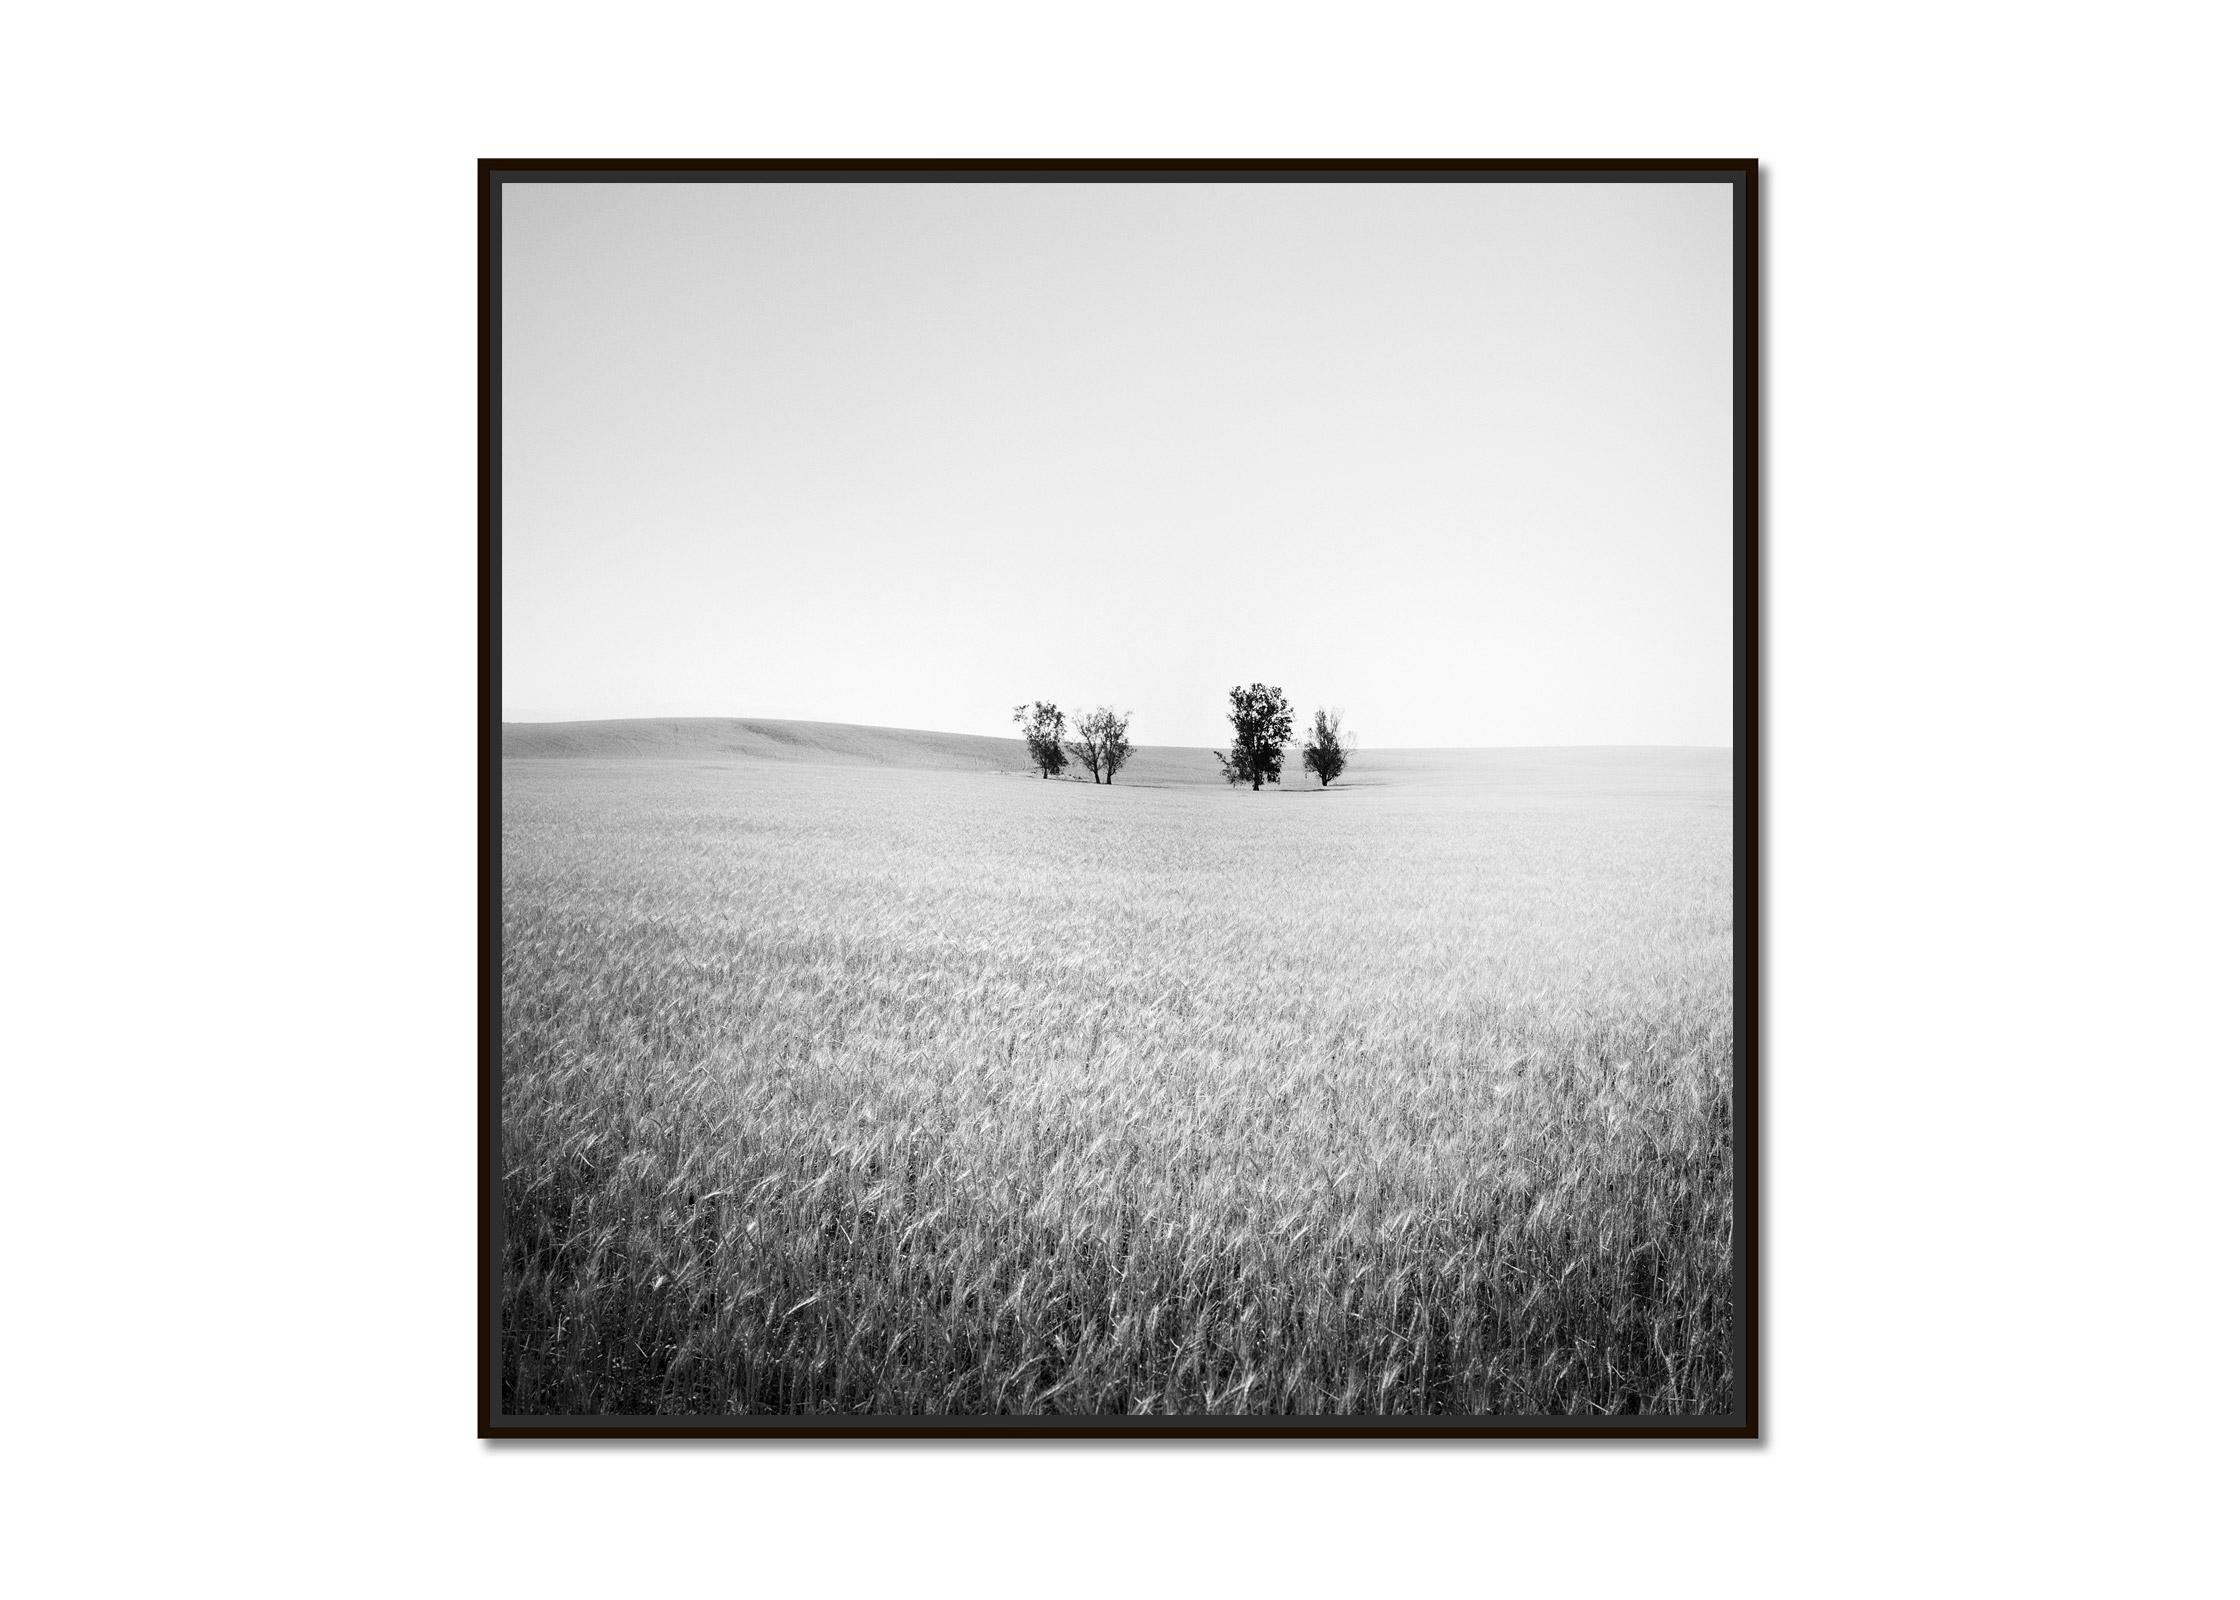 Trees in wheat field, California, USA, black and white art landscape photography - Photograph by Gerald Berghammer